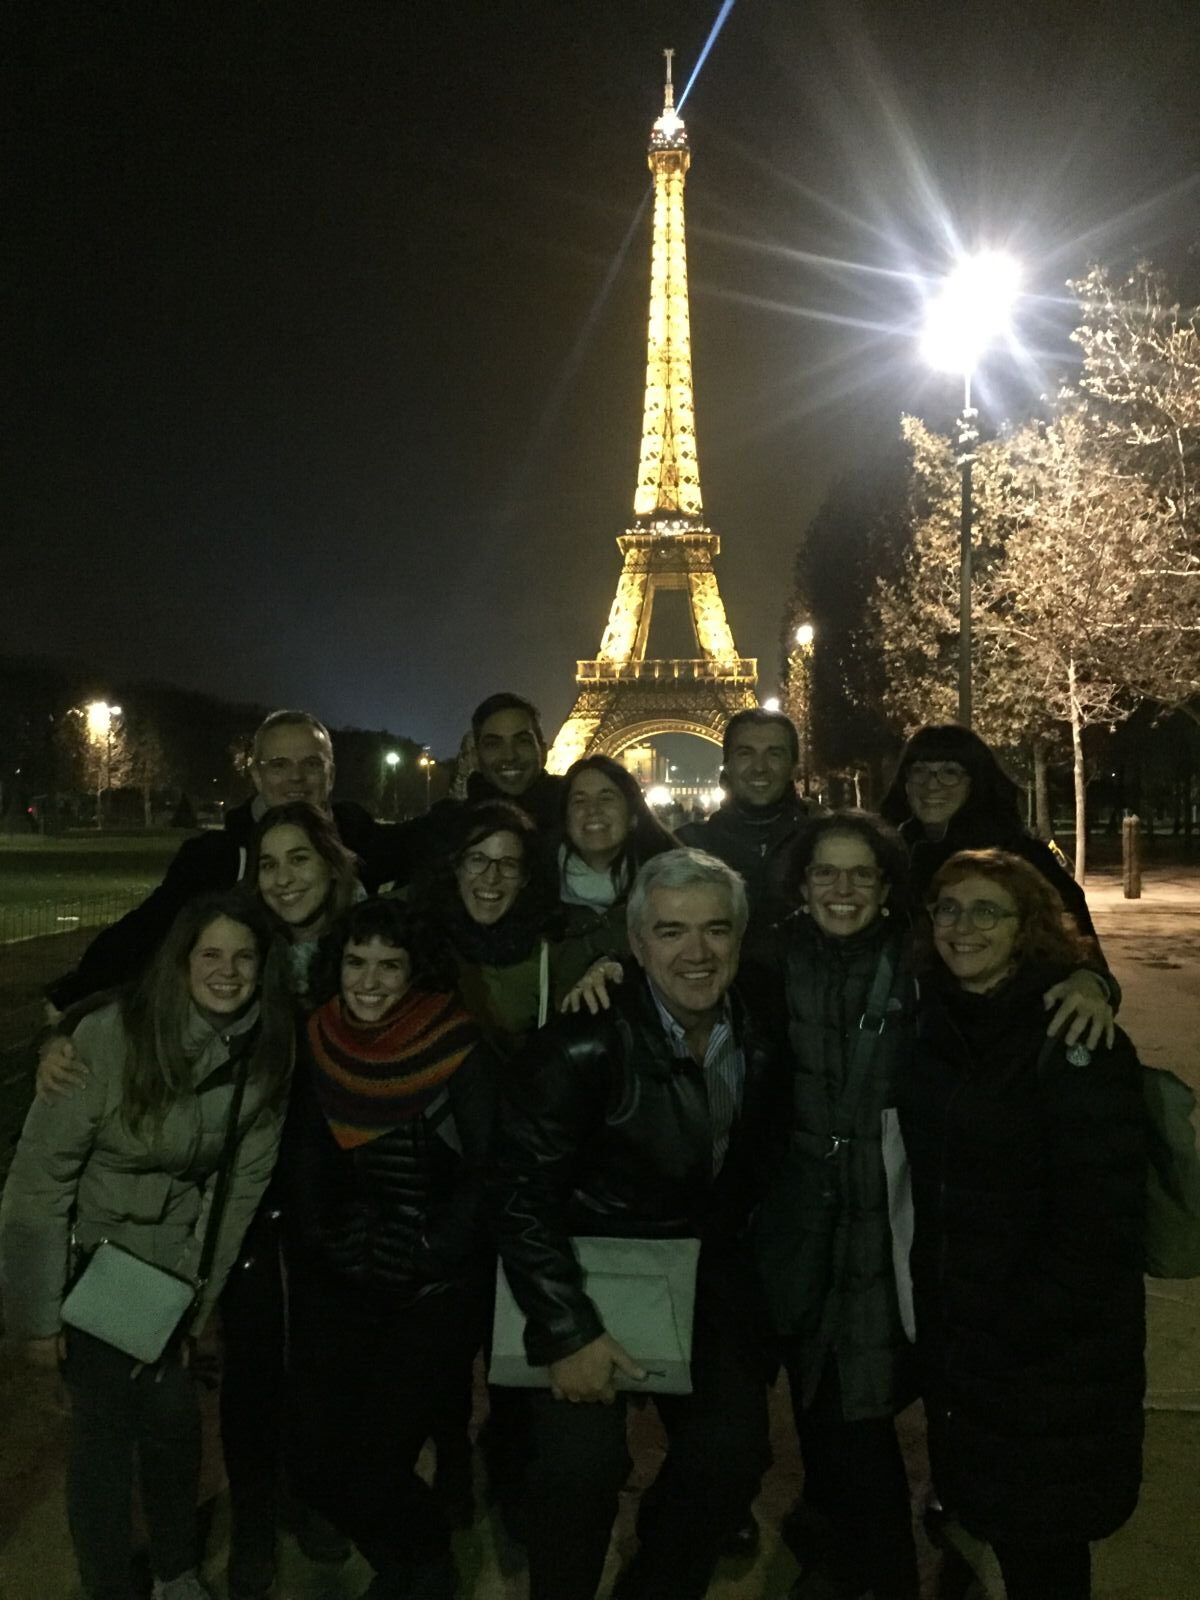 A group of people posing for a photo at night in front of the illuminated Eiffel Tower.